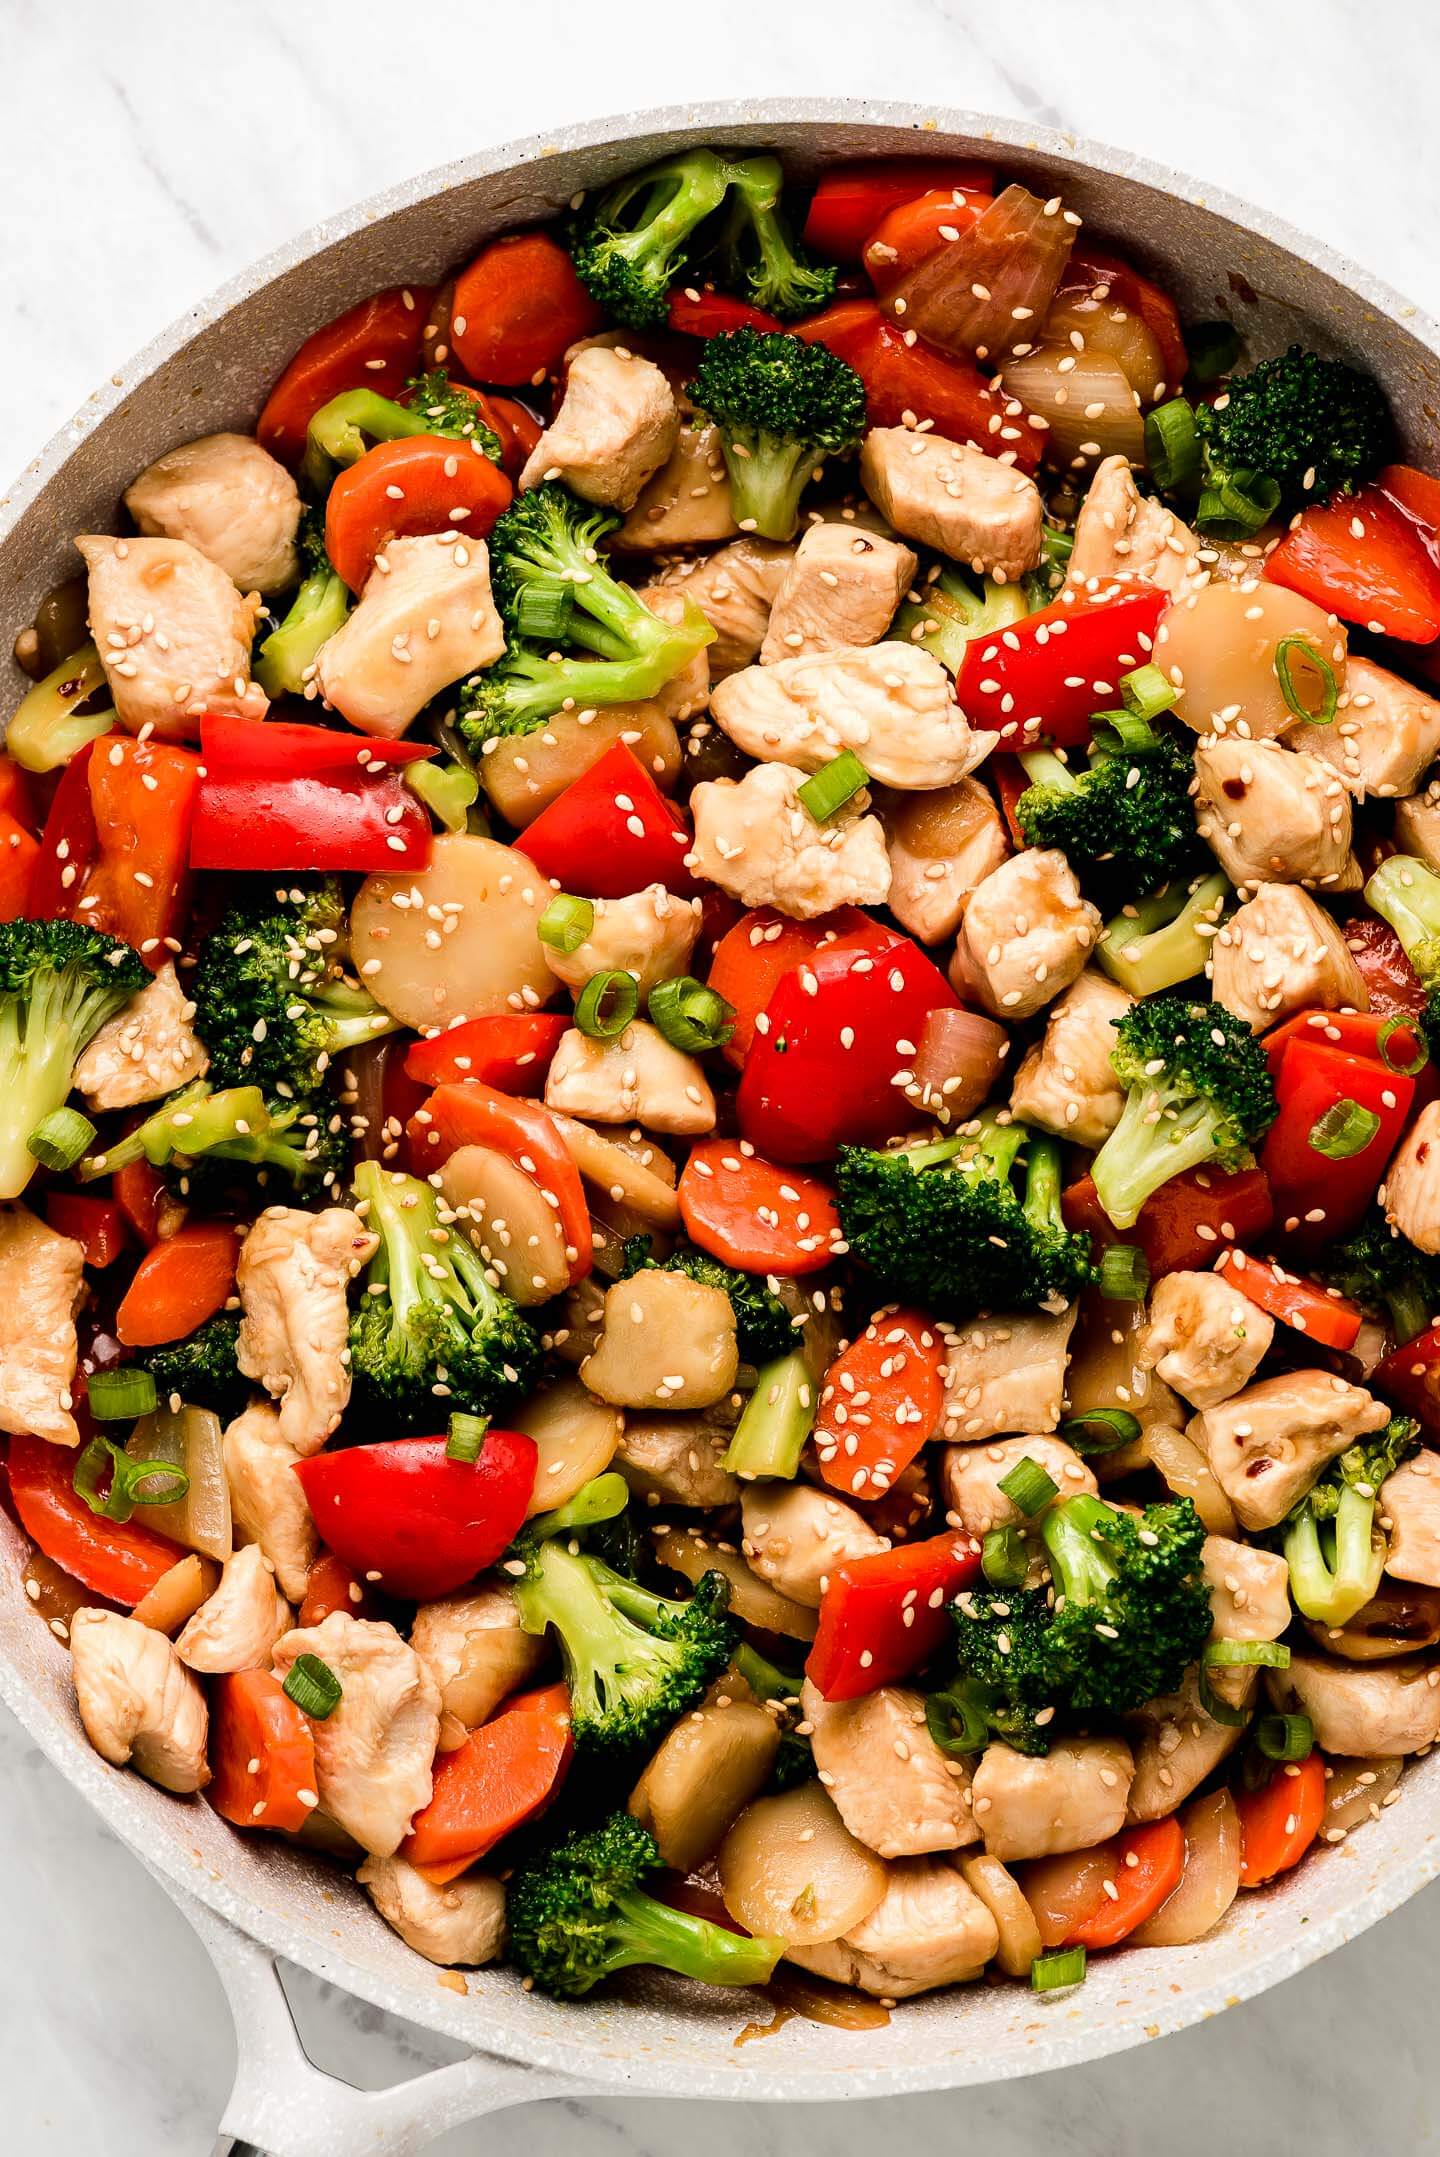 Chicken Stir Fry with vegetables in a skillet.